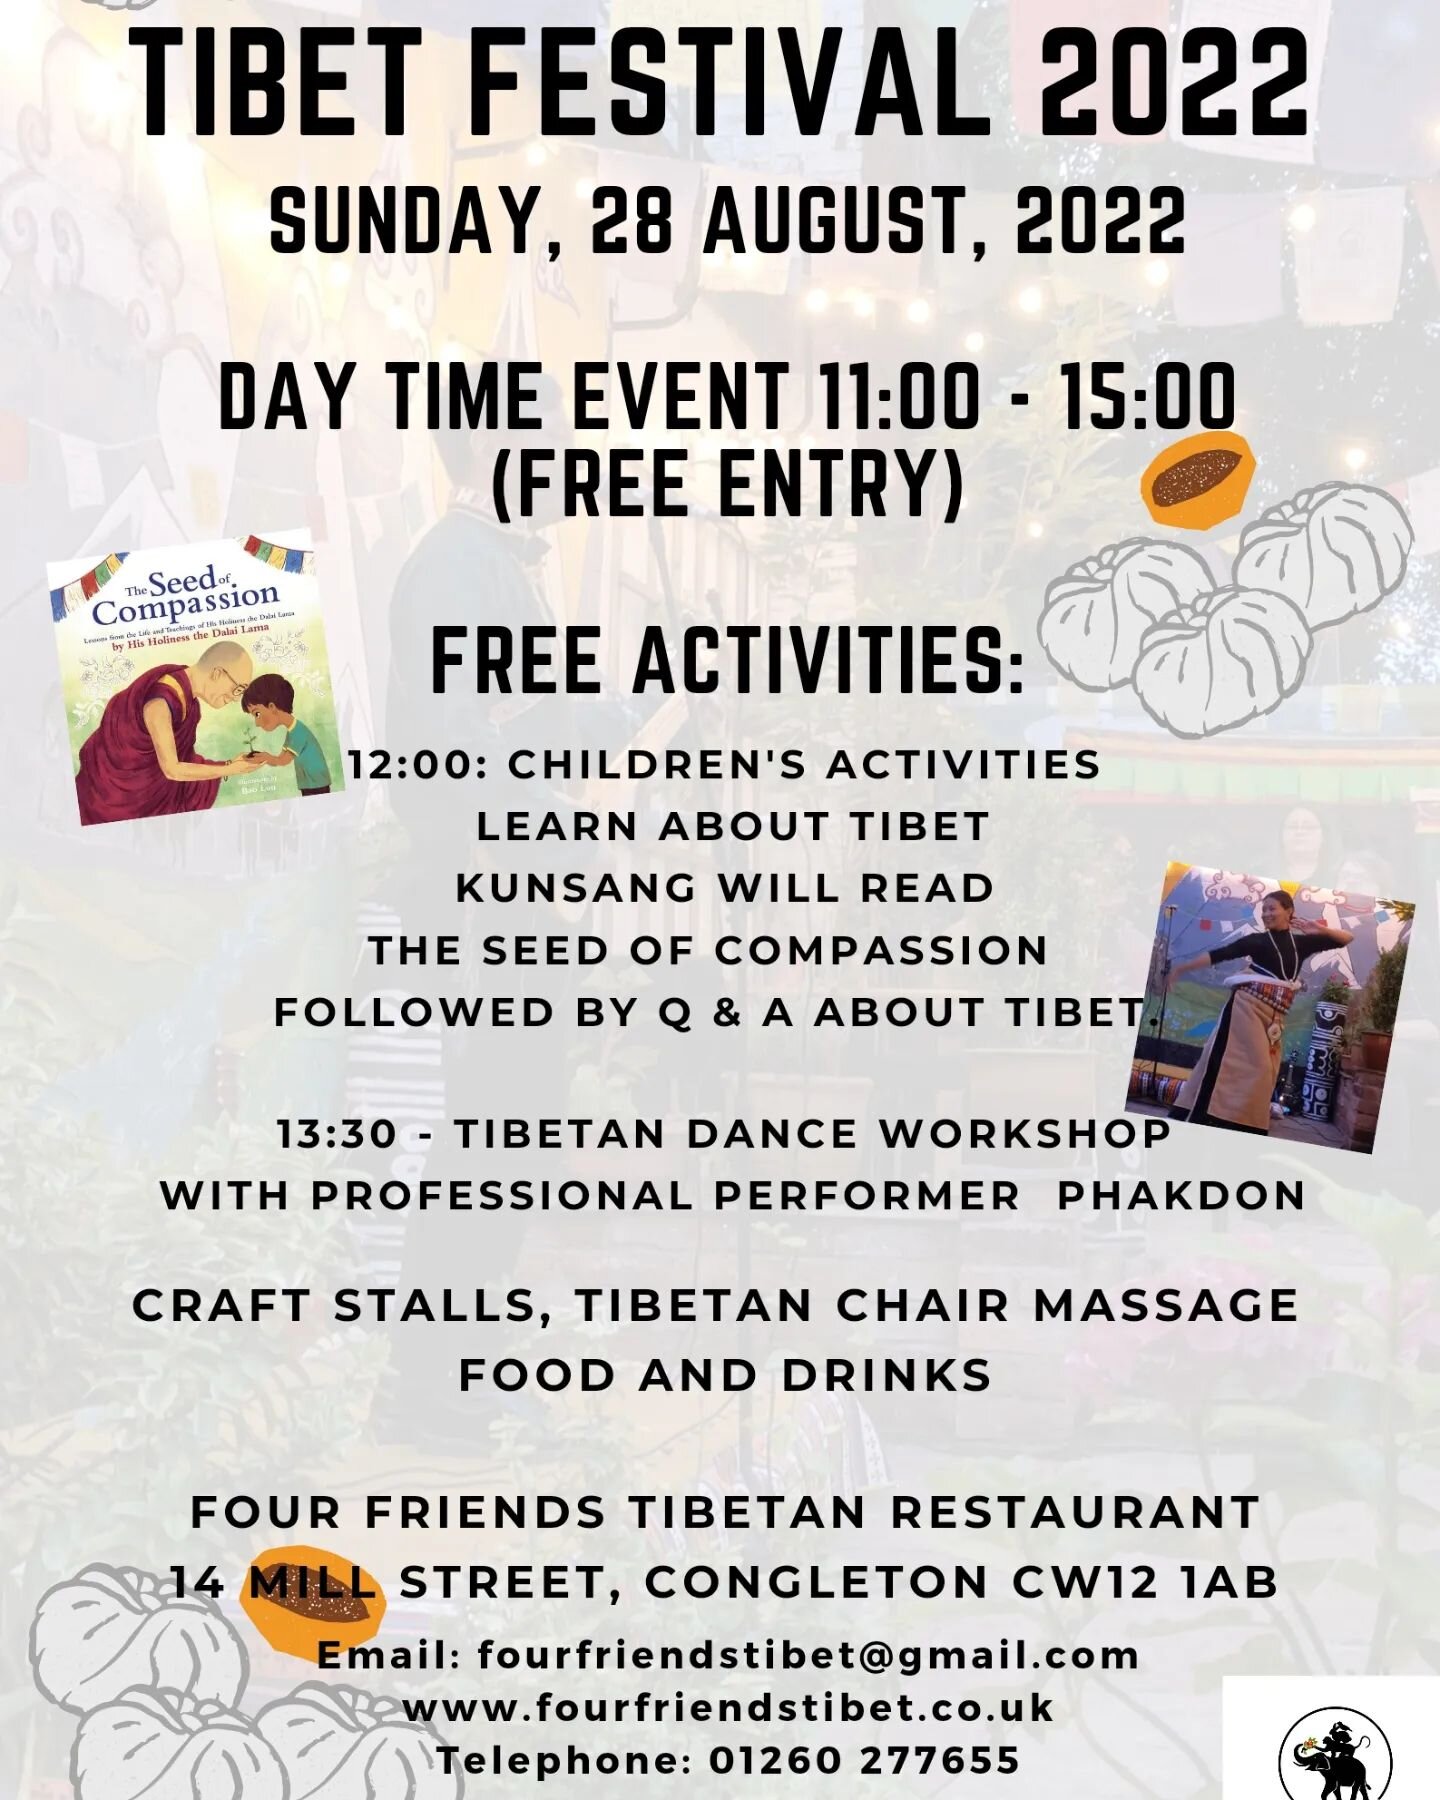 Come have some food and relax with a Tibetan chair massage.